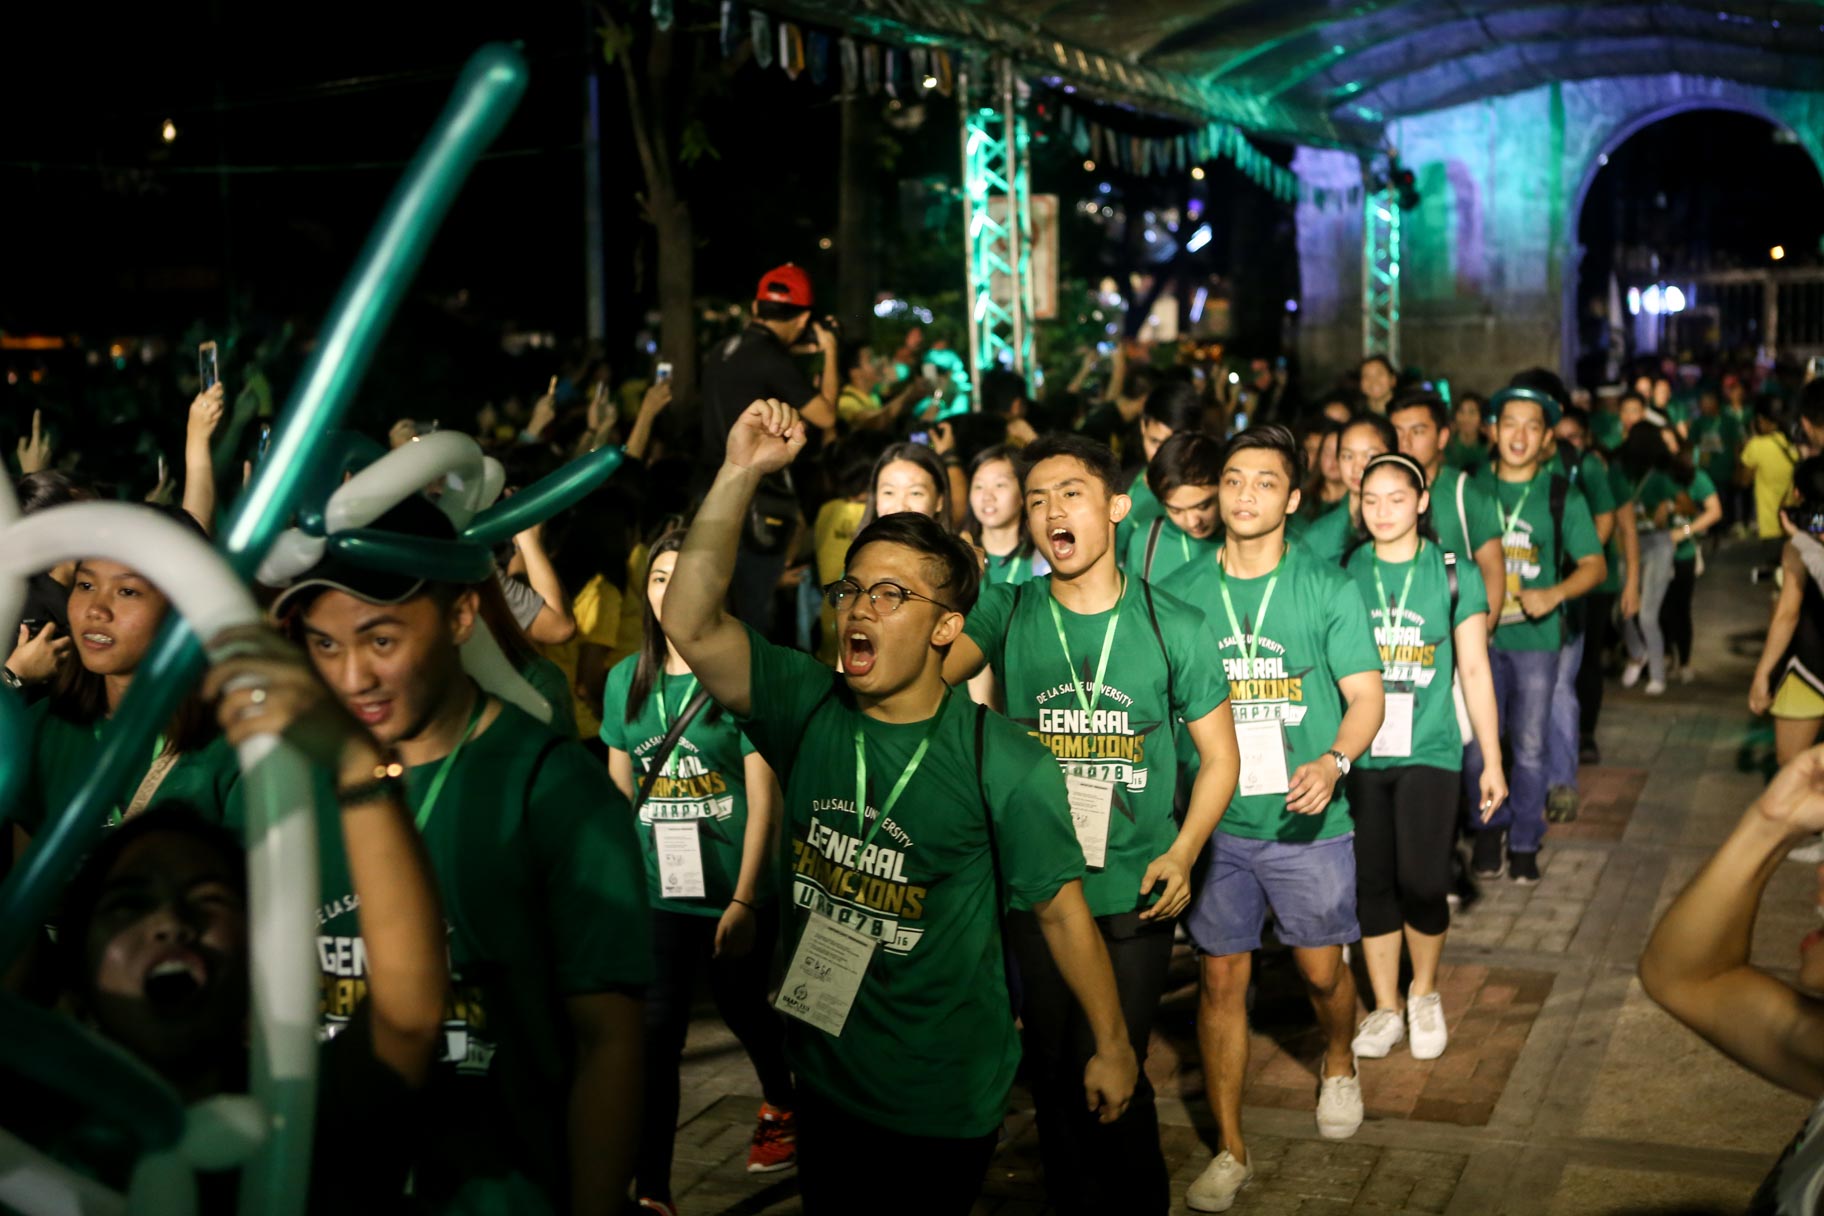 UAAP Season 79 opening ceremonies at the UST campus in Manila. Photo by Tristan Tamayo/INQUIRER.net